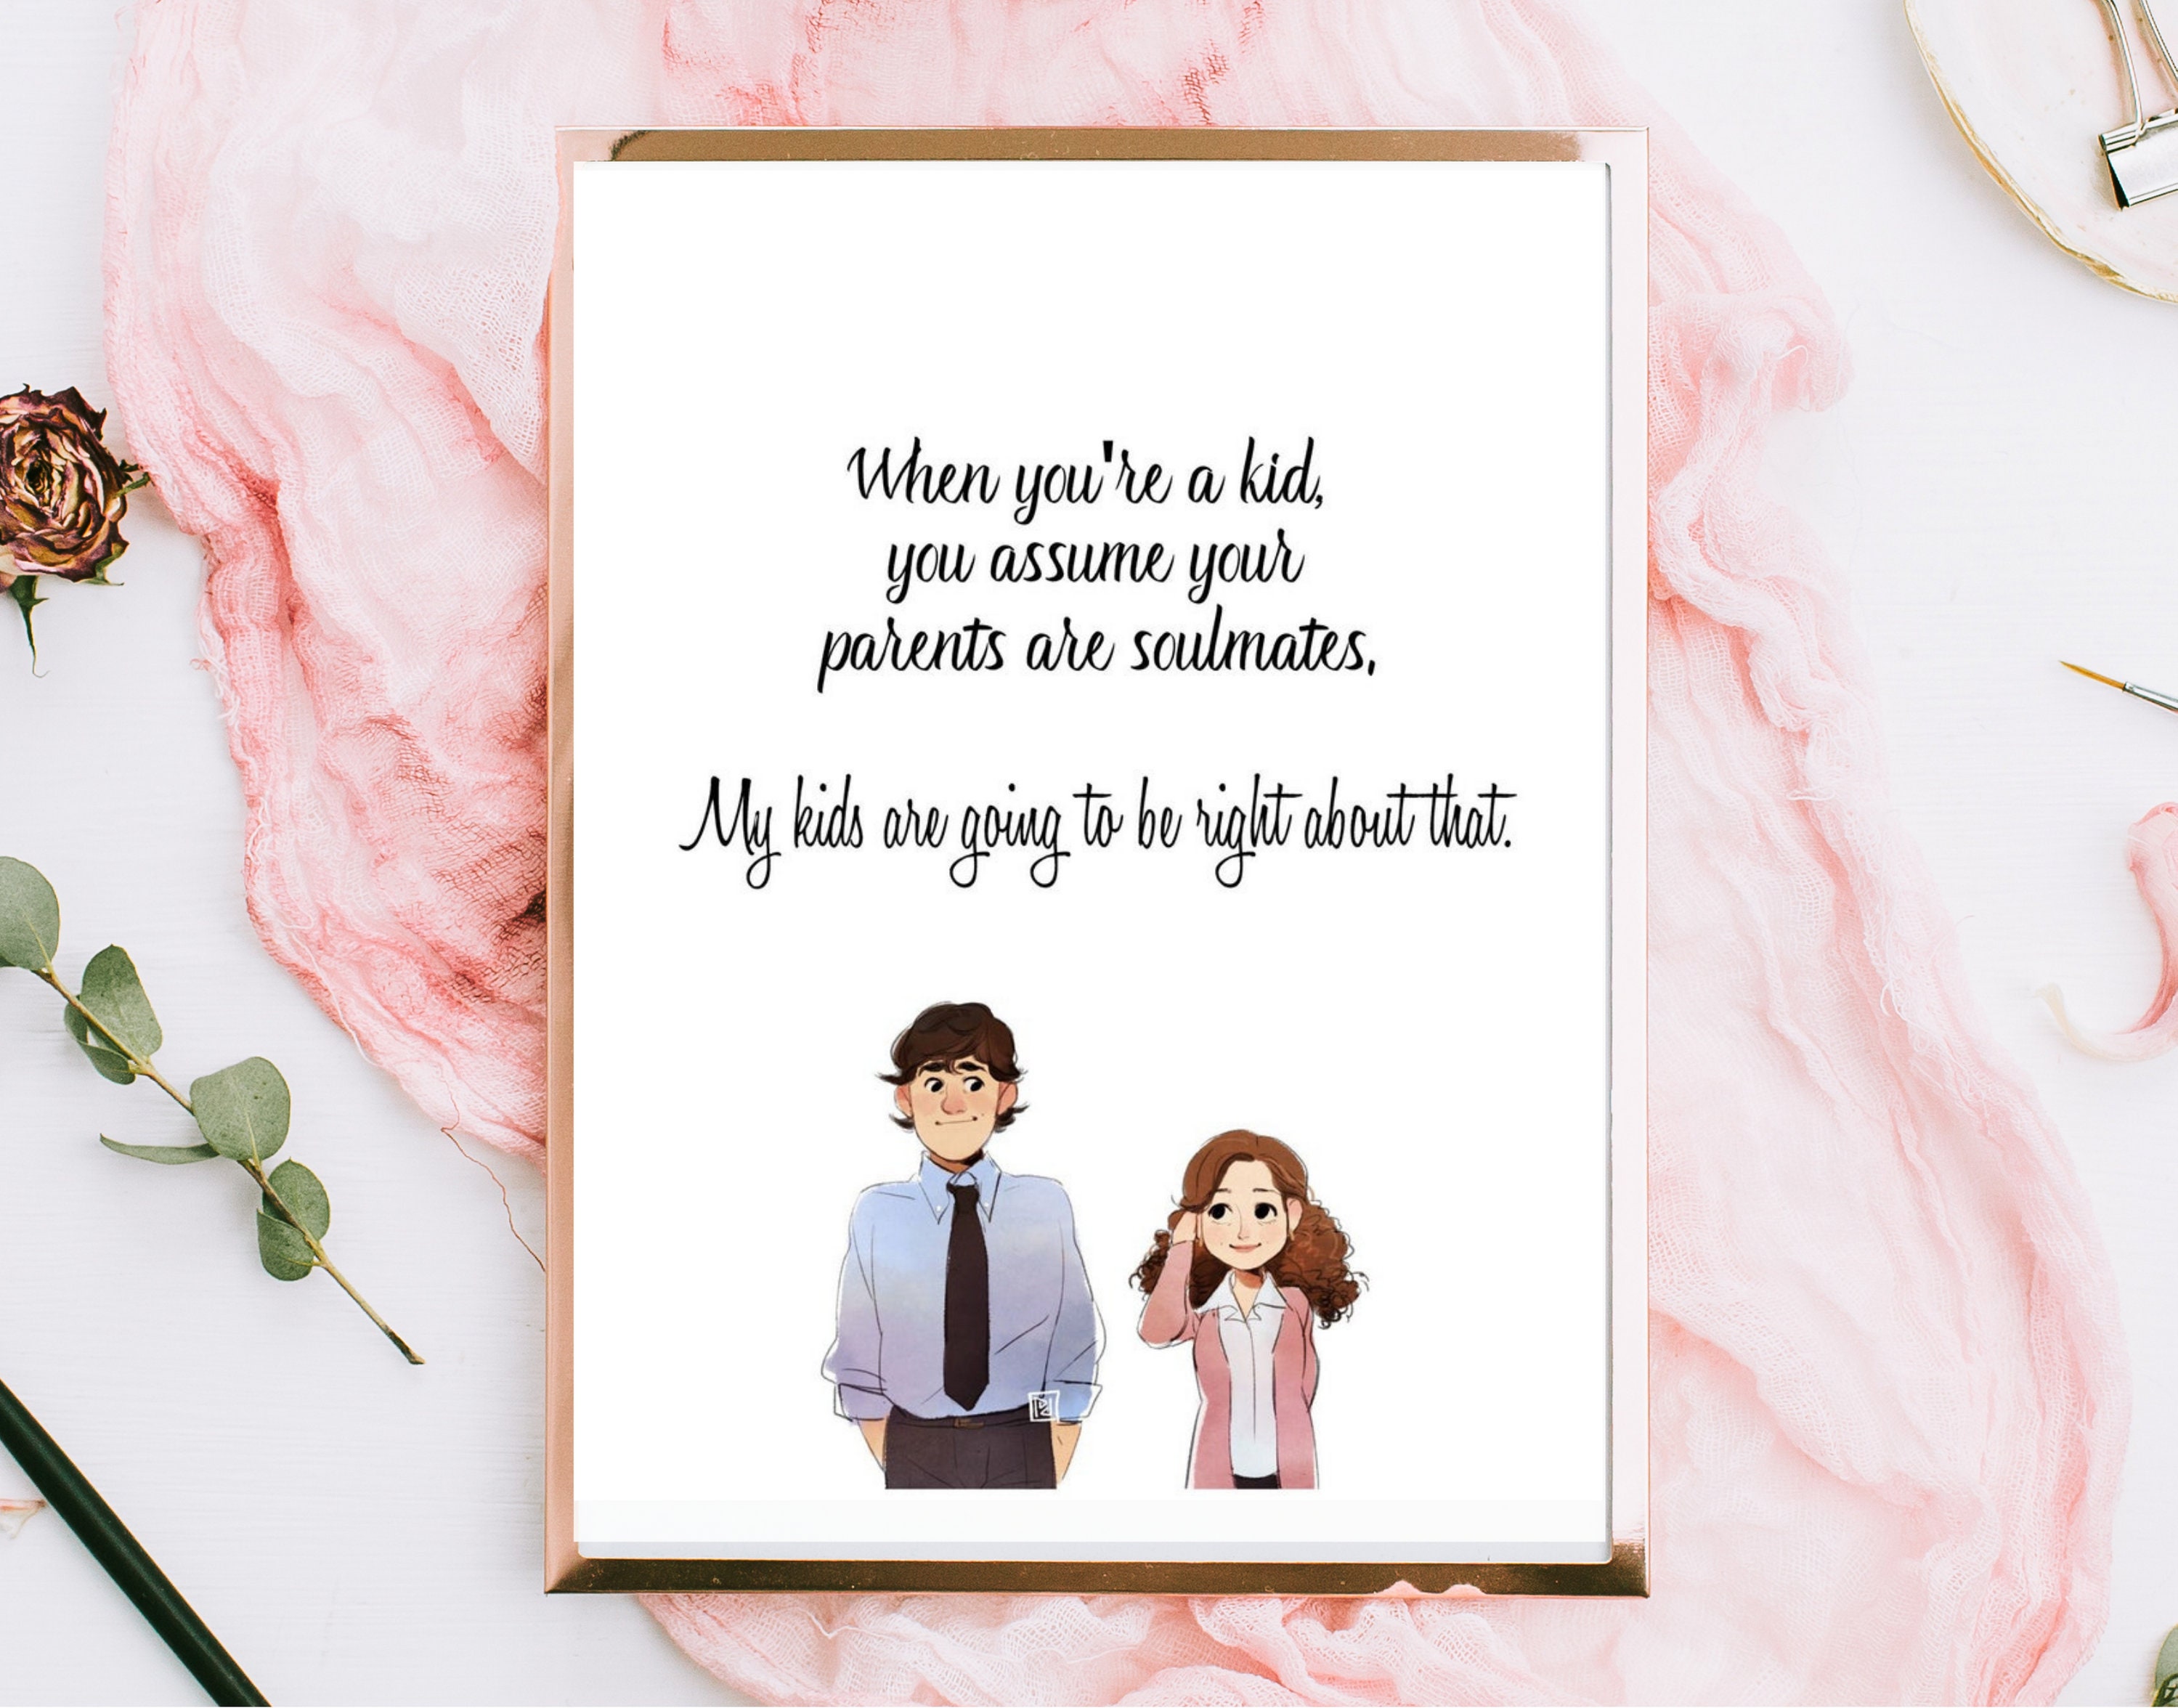 Jim and Pam Soulmates Quote the Office TV Show Instant - Etsy